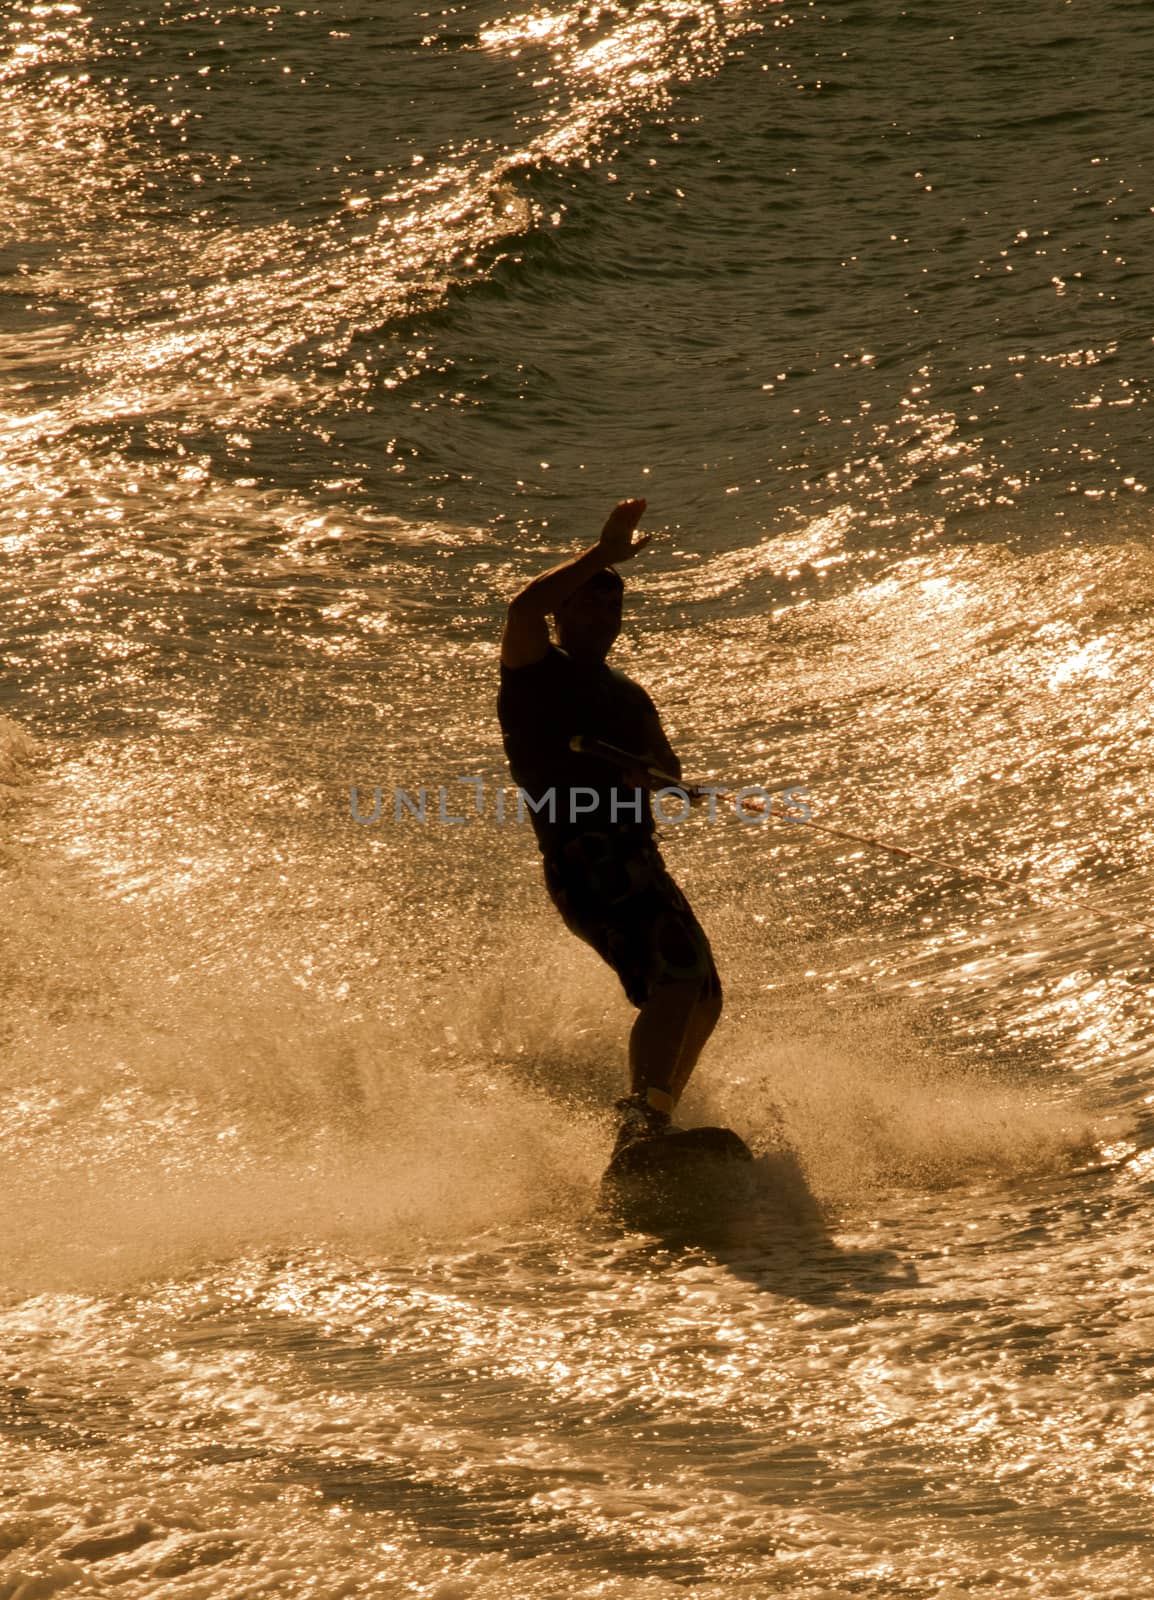 Silhouette of a water skier by Goodday